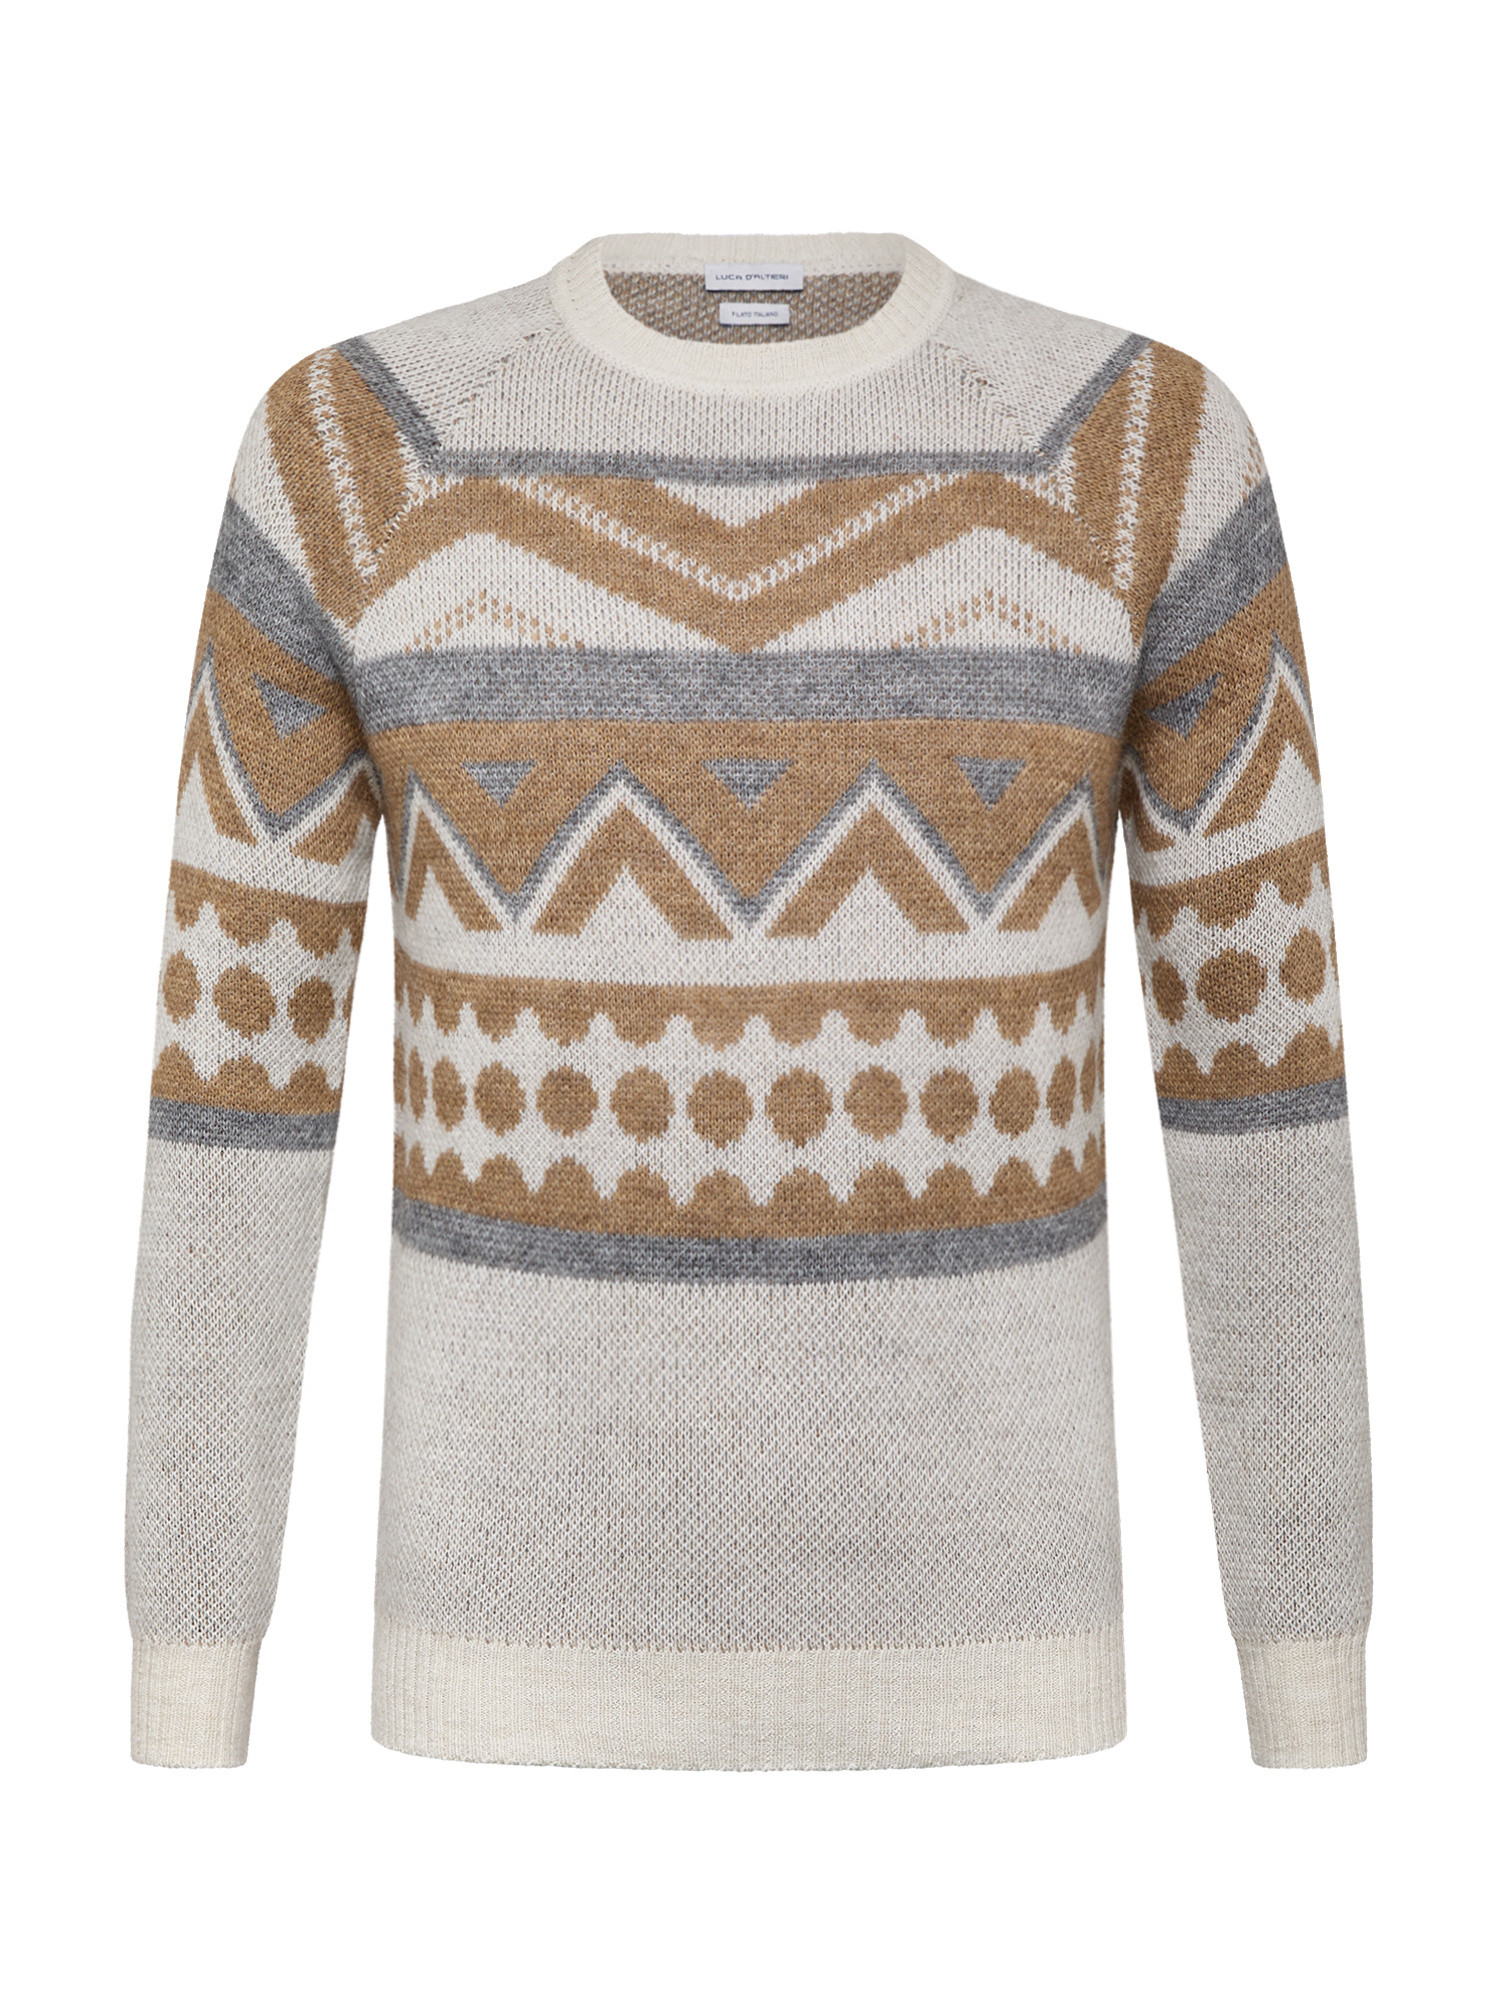 Luca D'Altieri - Christmas sweater in wool and alpaca blend, White, large image number 0